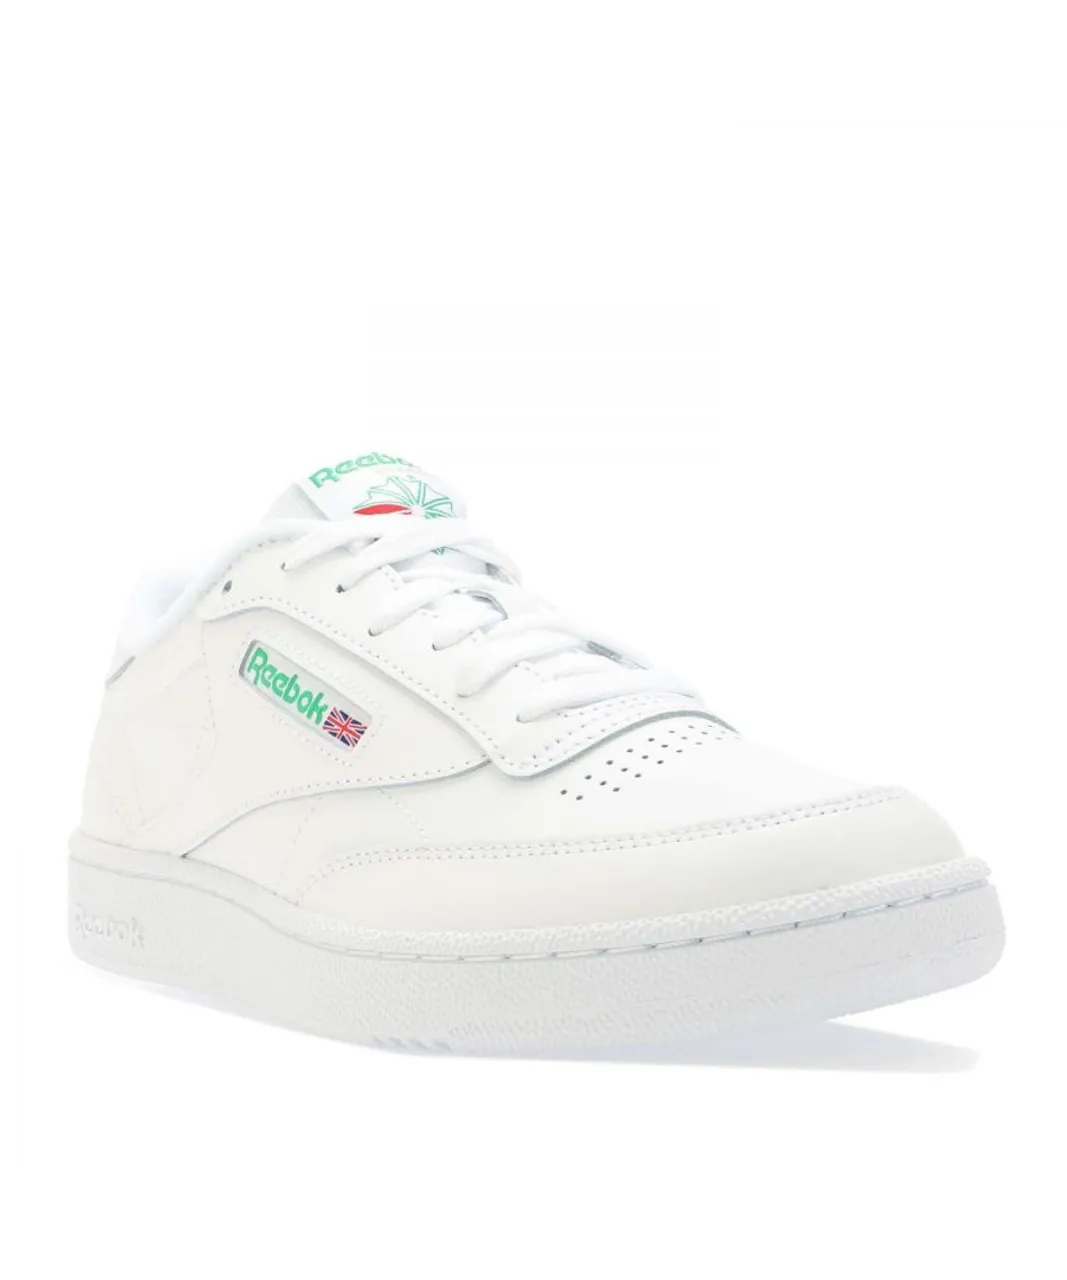 Reebok Mens Classics Club C 85 Trainers in White Leather (archived)